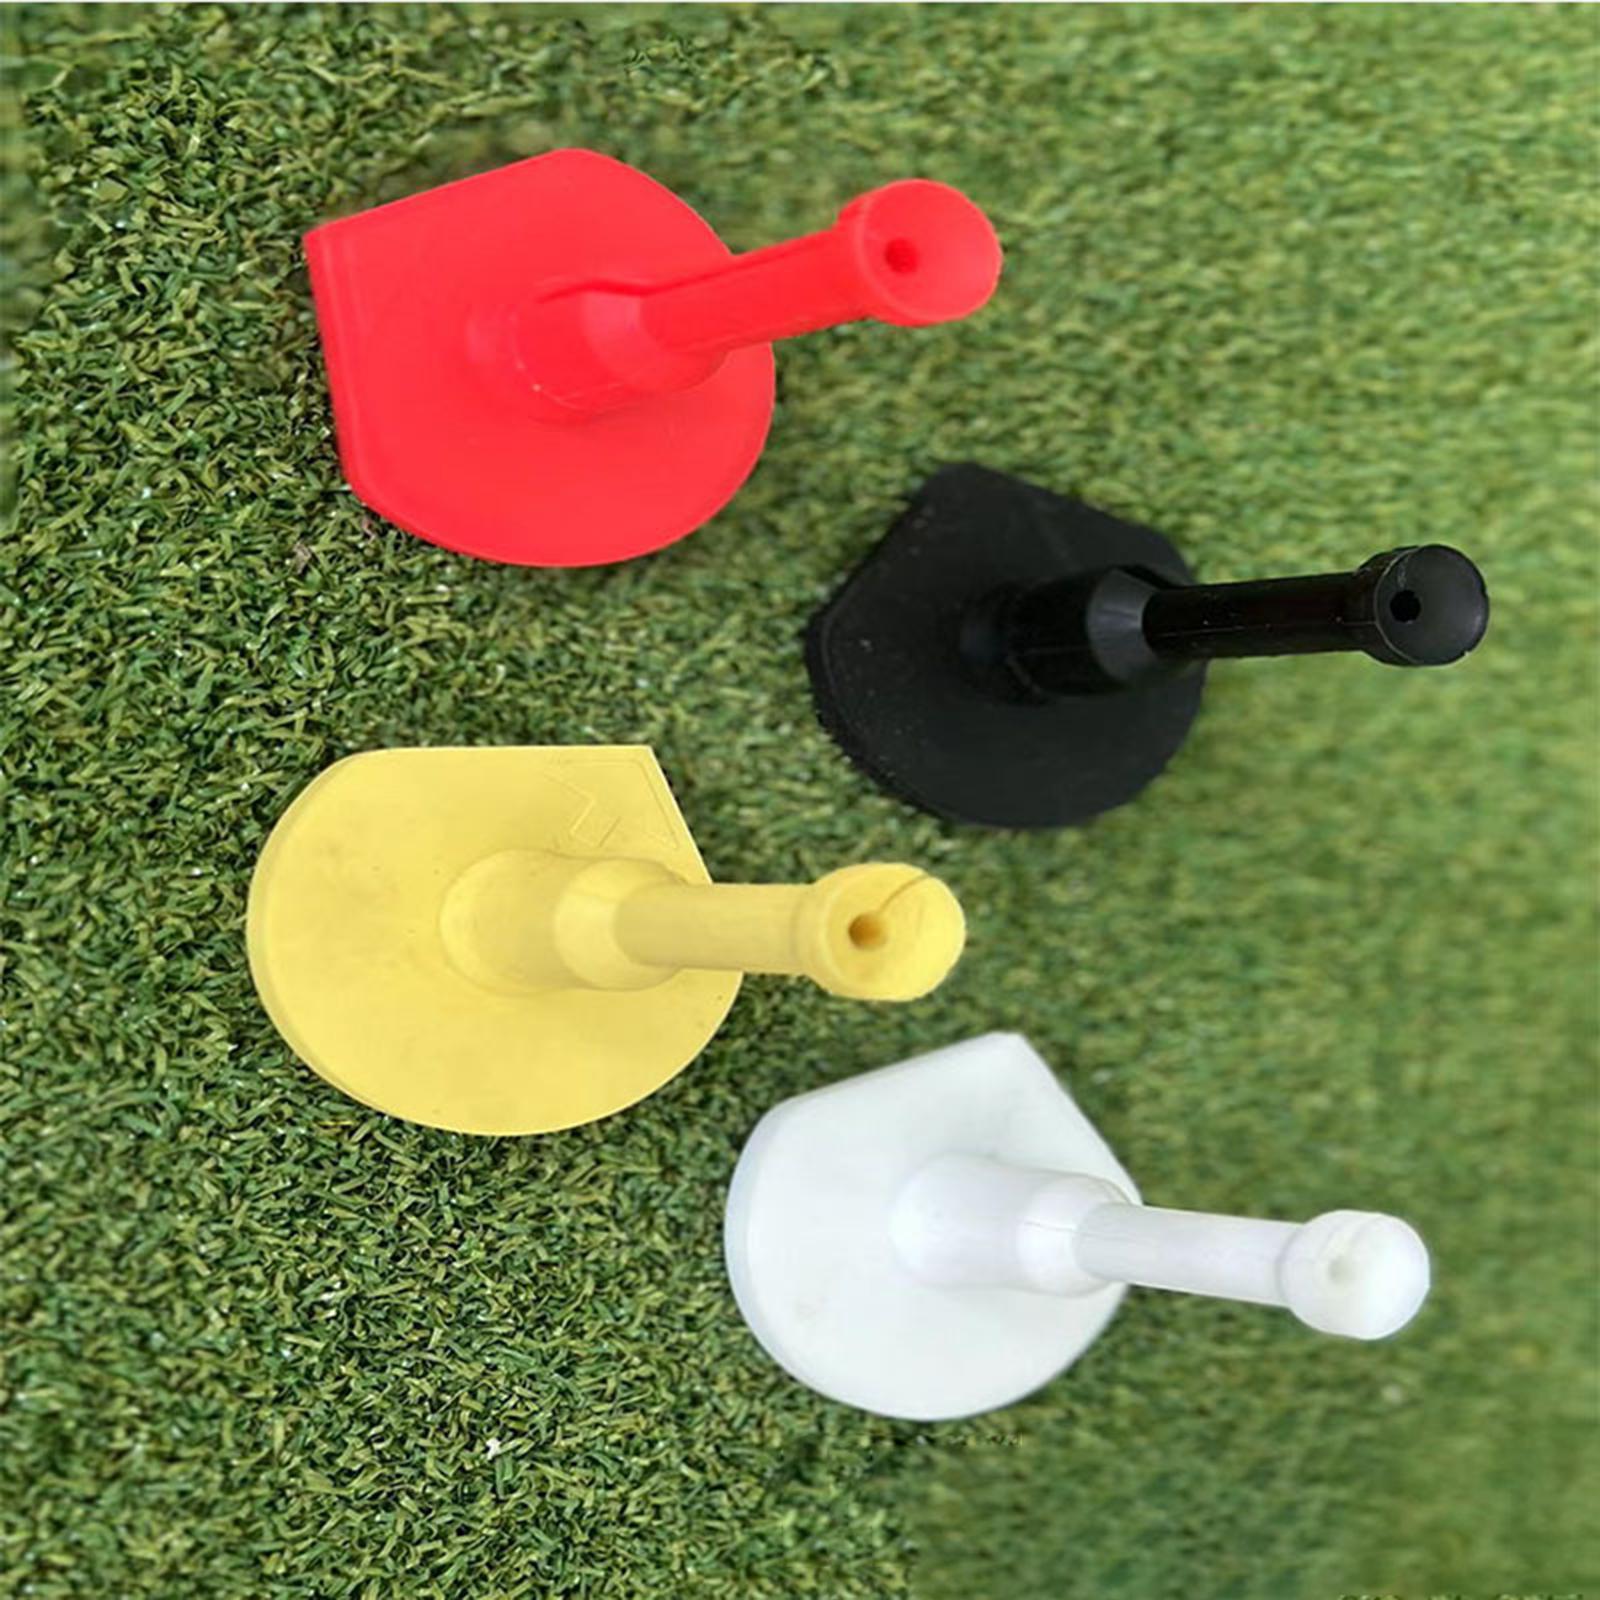 PVC Rubber Golf Tees Holder Portable Reusable Durable for Sports Accessories black